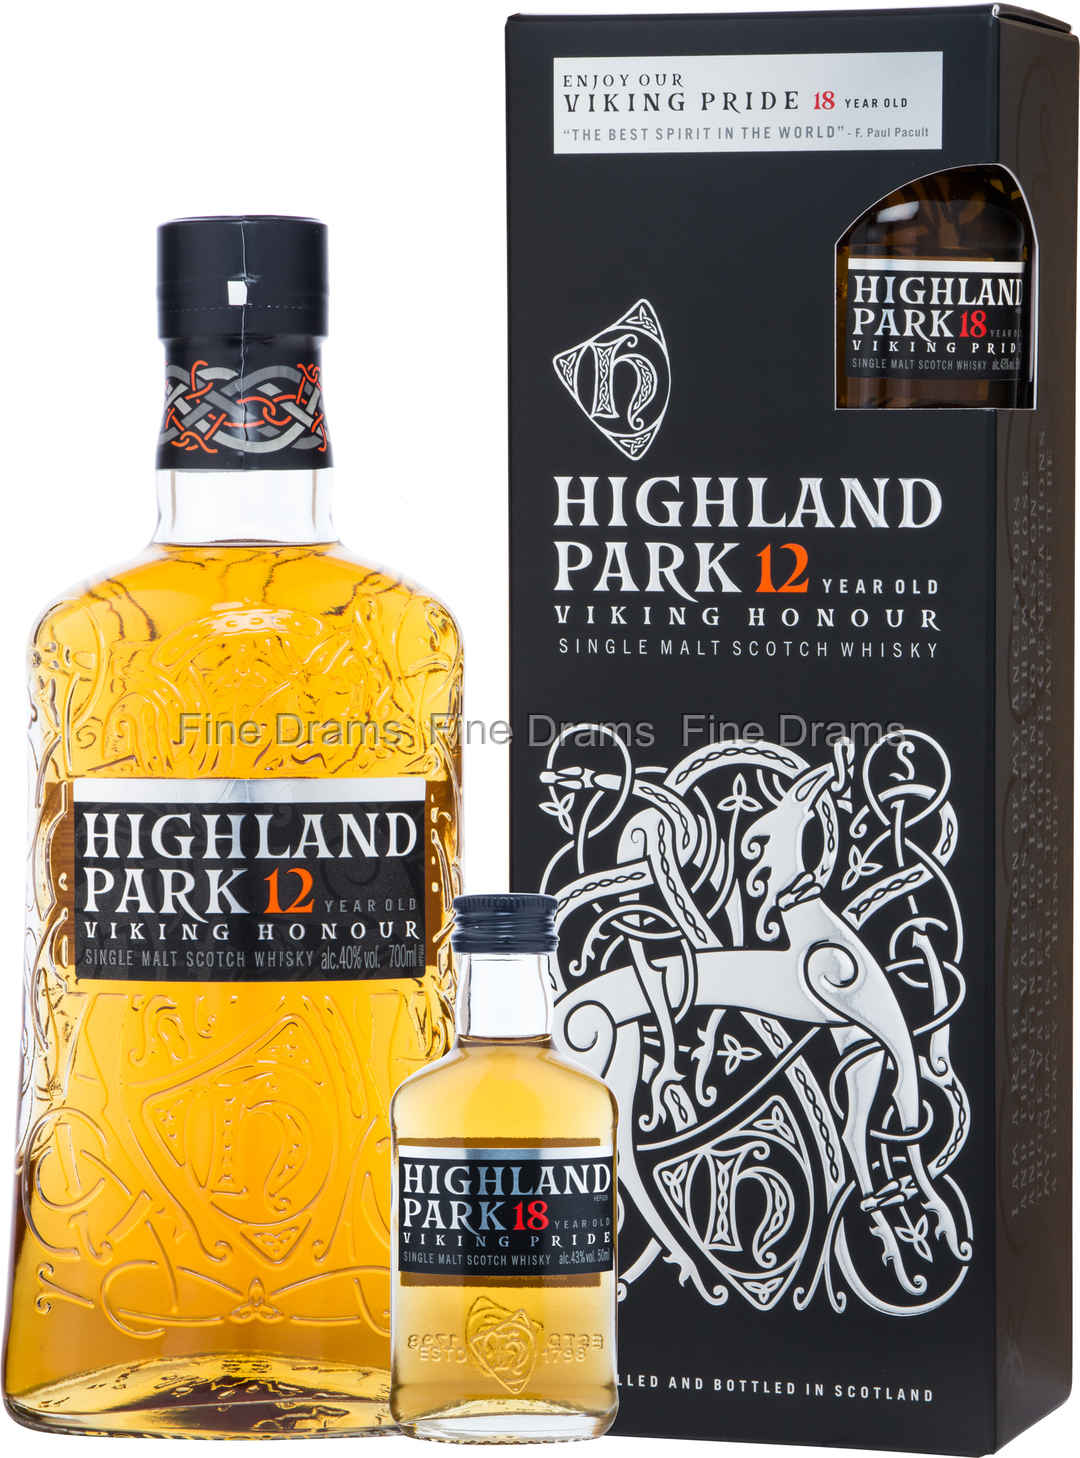 Highland Park 12 Year Old Whisky - Viking Honour with 18 Year Old Viking  Pride Miniature